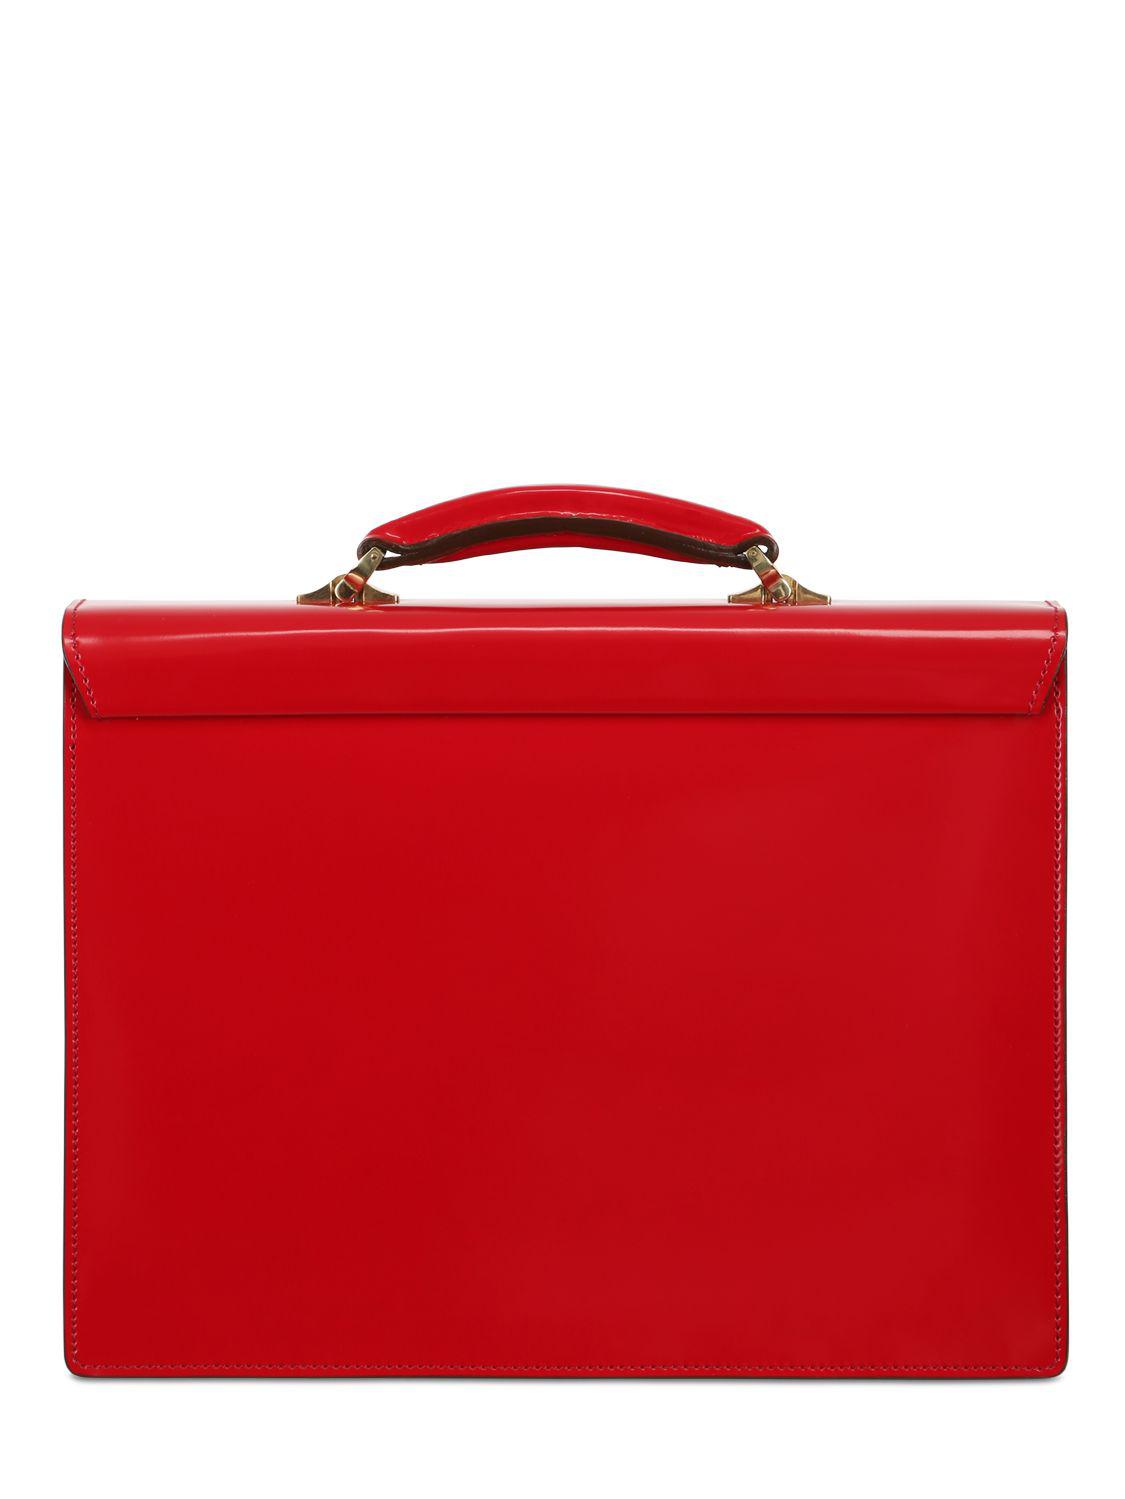 Ohba Cordovan Leather Briefcase in Red for Men - Lyst